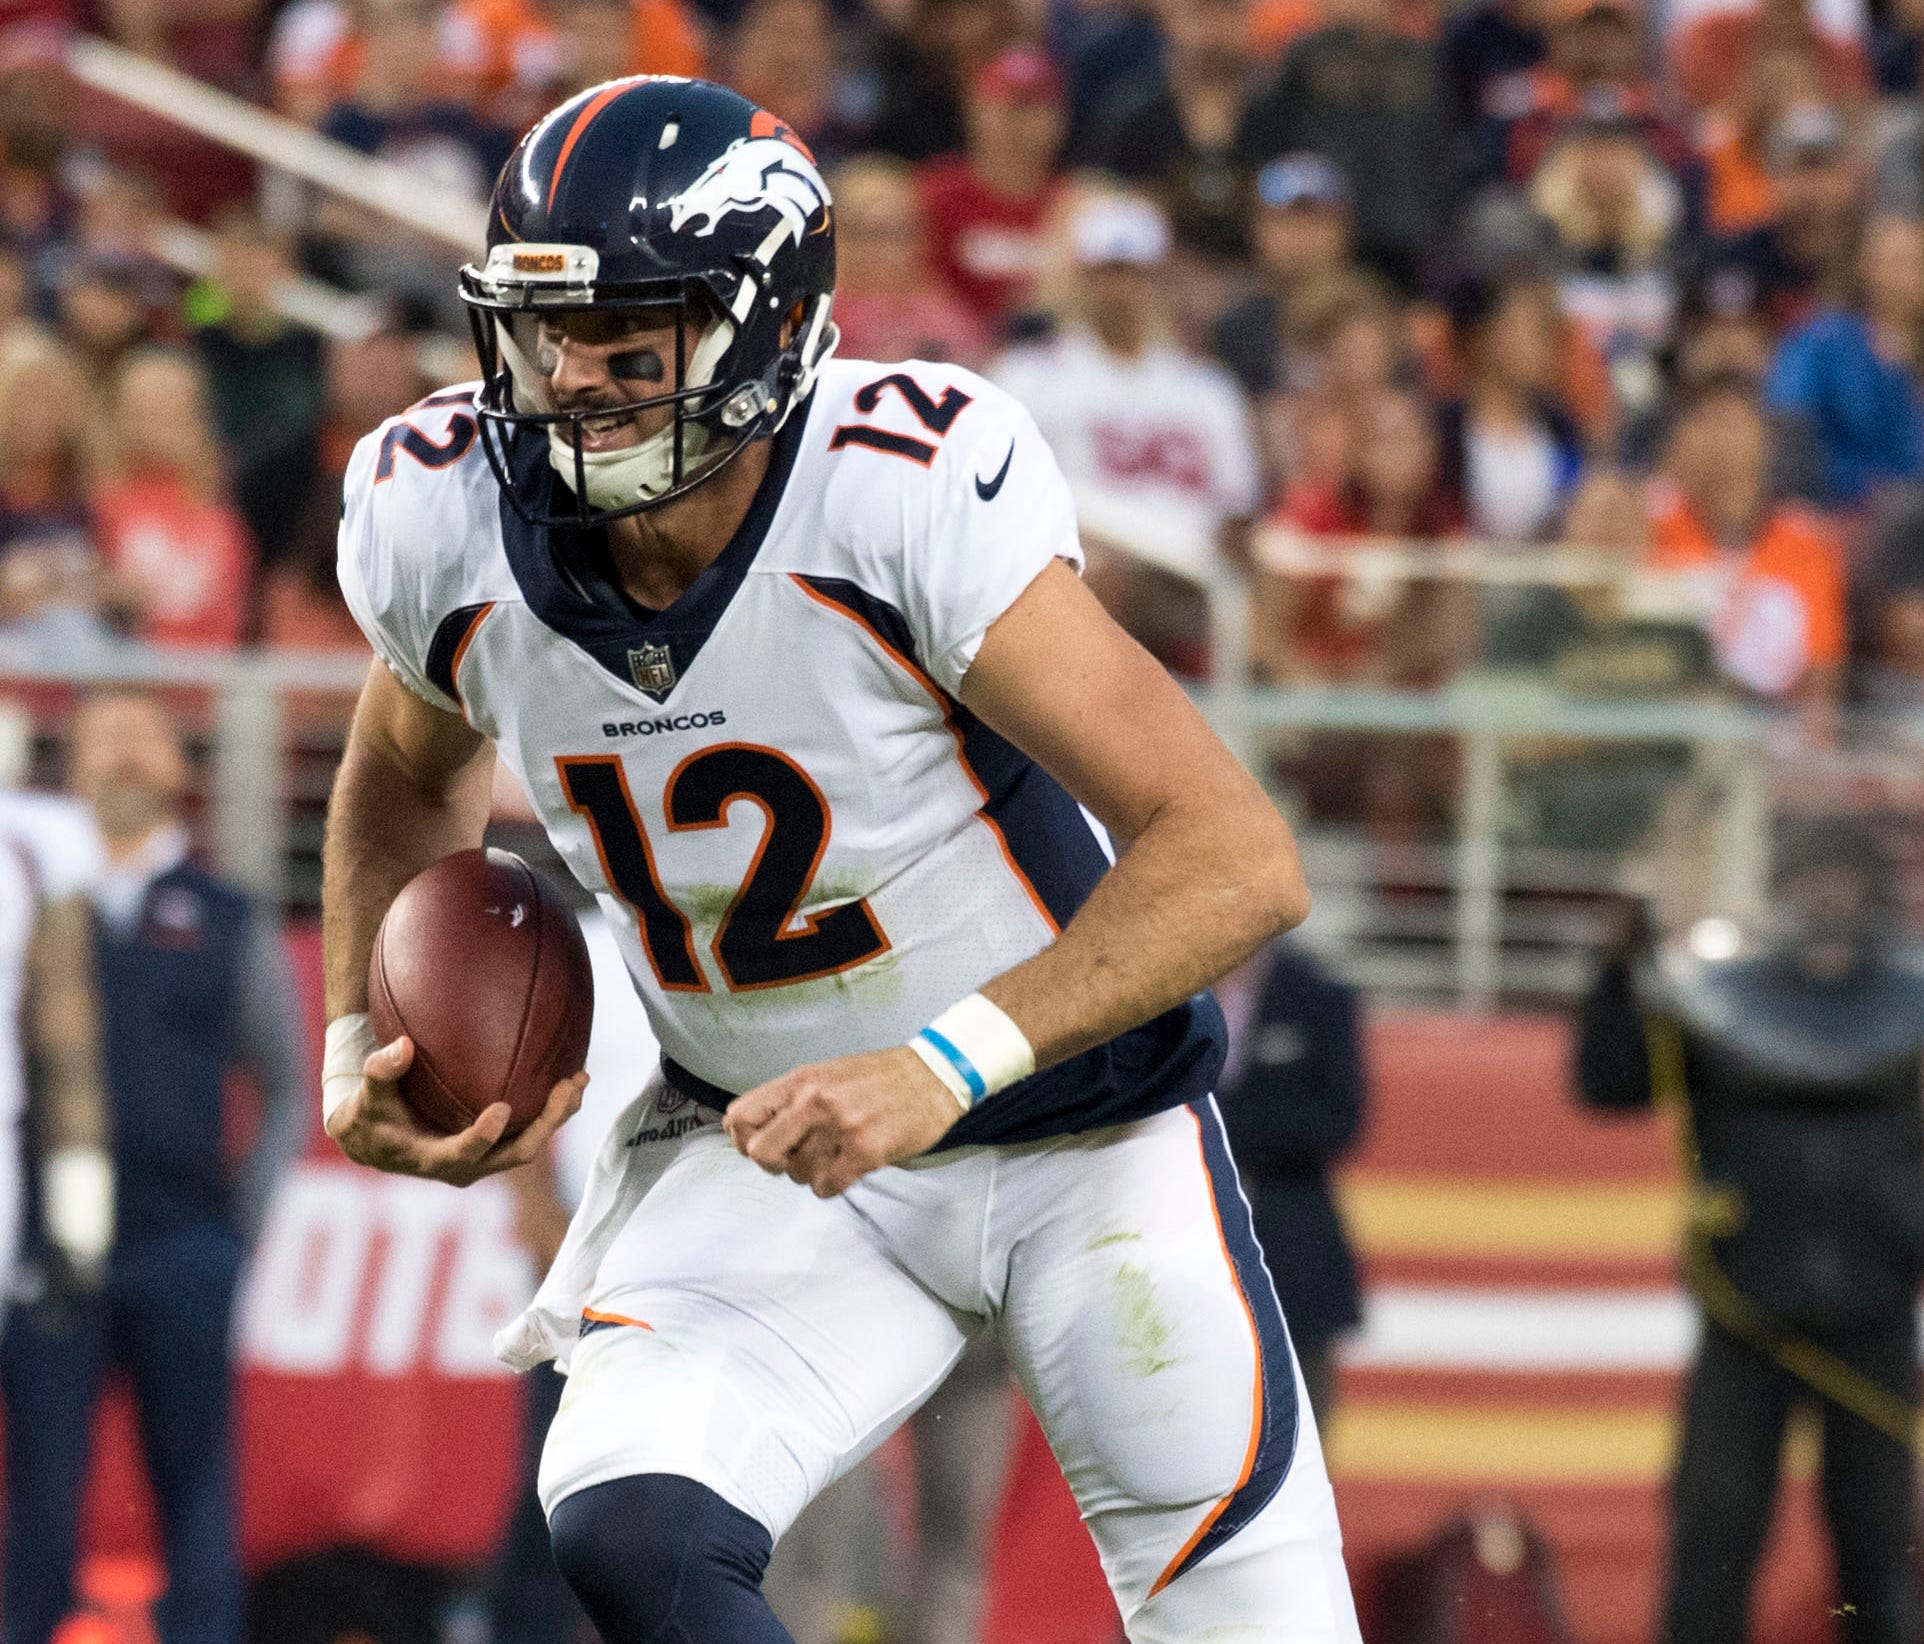 Denver Broncos quarterback Paxton Lynch (12) runs with the football against the San Francisco 49ers during the second quarter at Levi's Stadium.